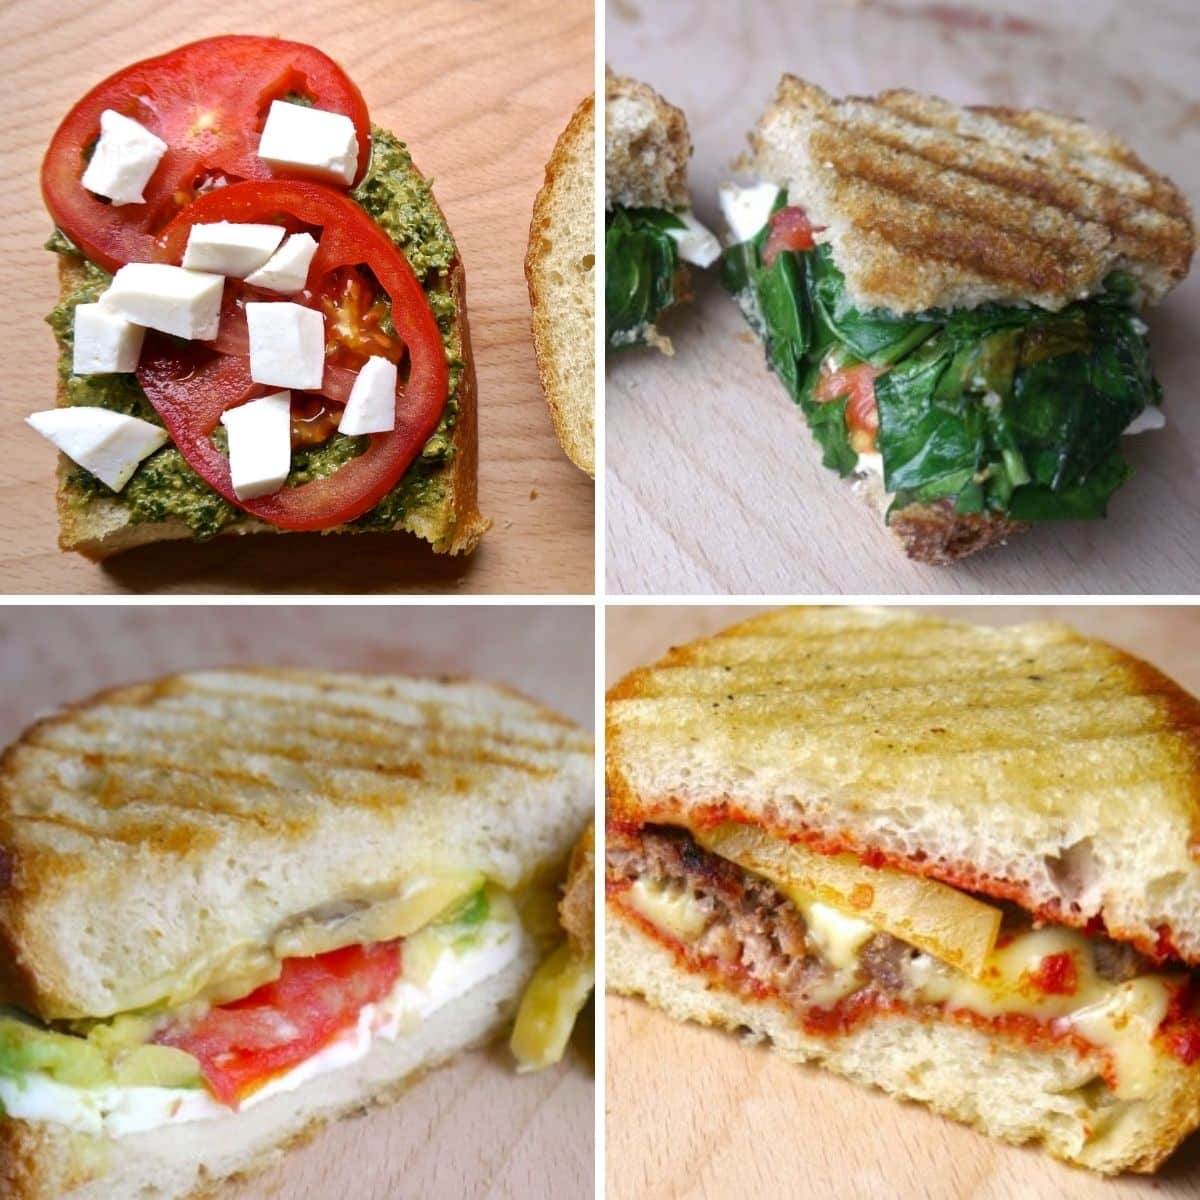 4 images of grilled cheese recipes.